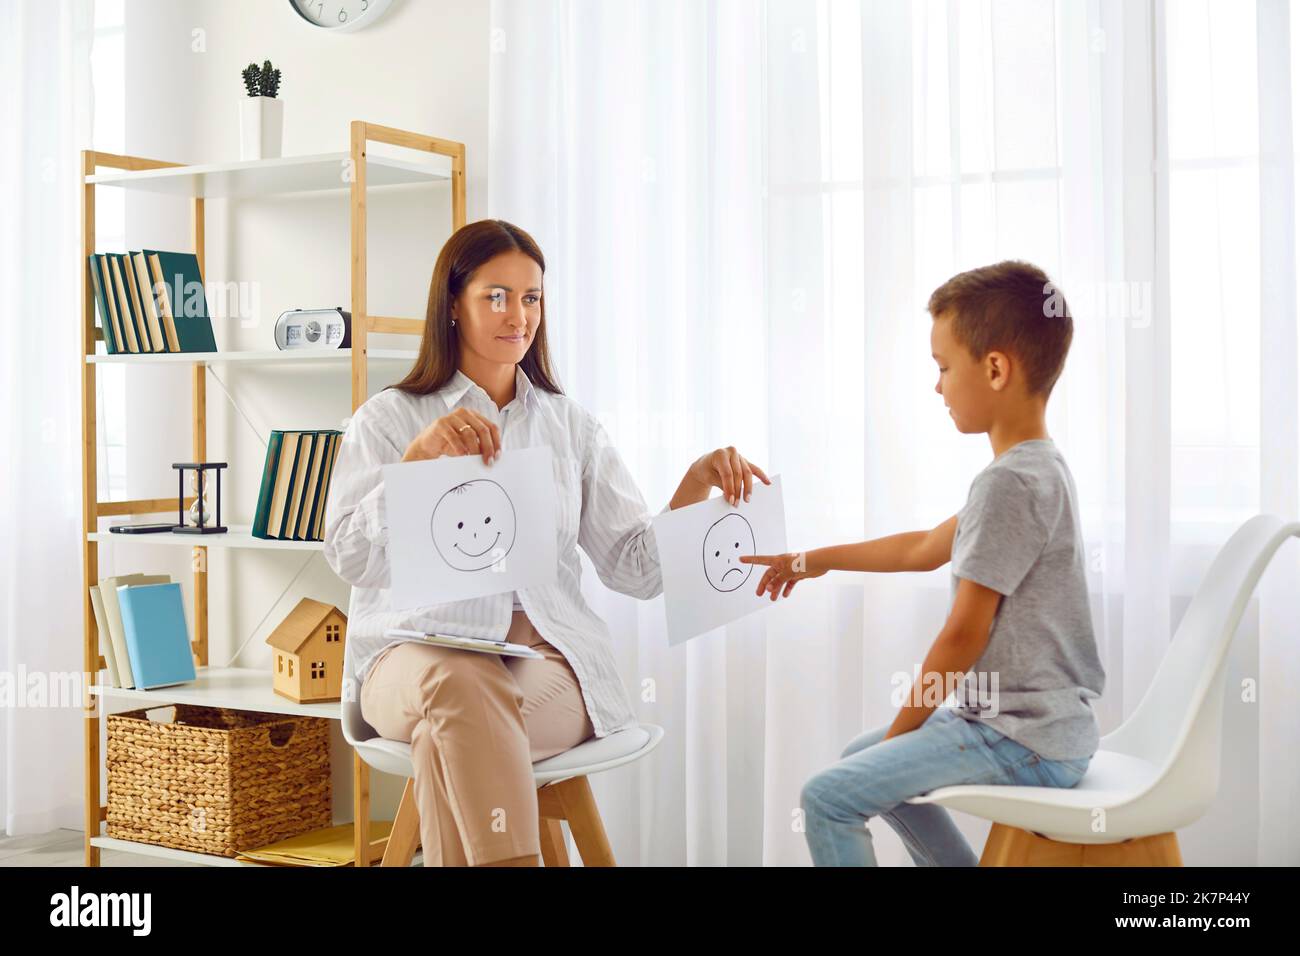 Psychologist or therapist uses emoji while talking with school child about emotions Stock Photo